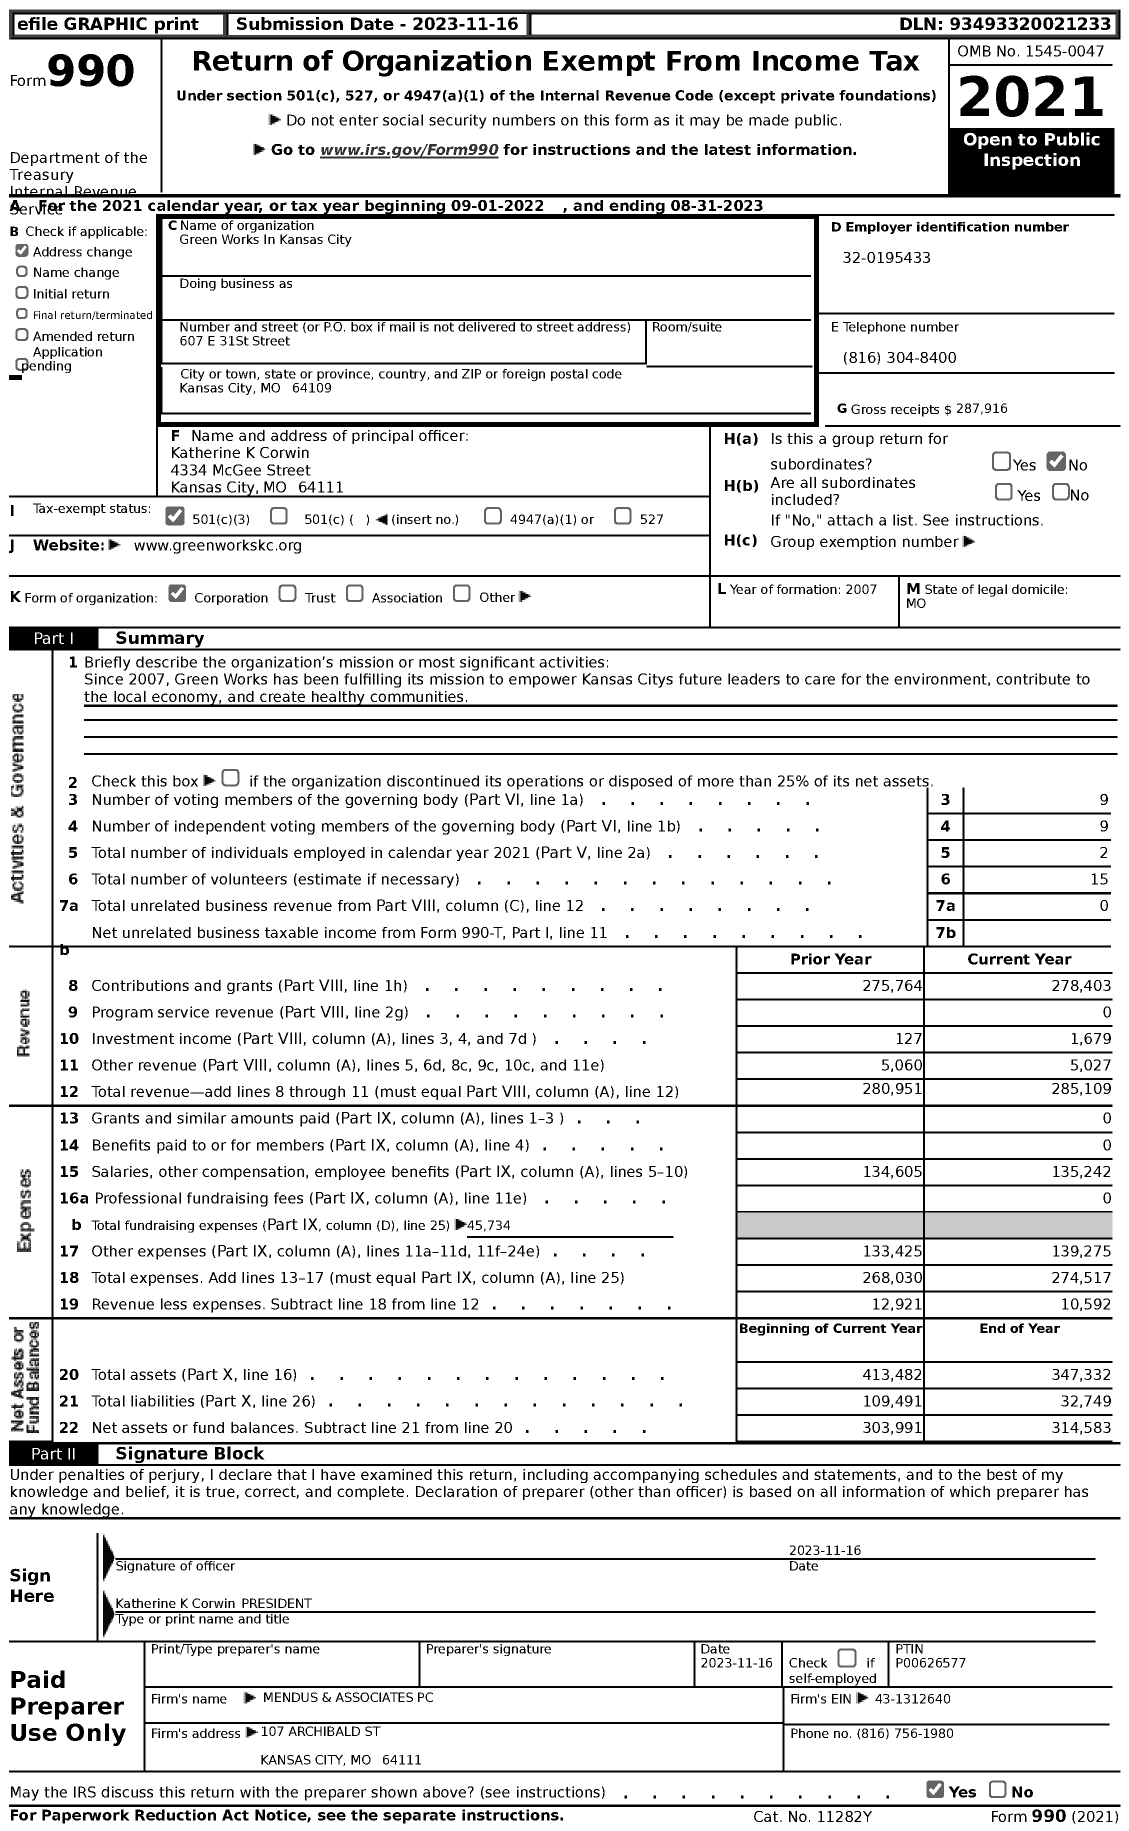 Image of first page of 2022 Form 990 for Green Works In Kansas City